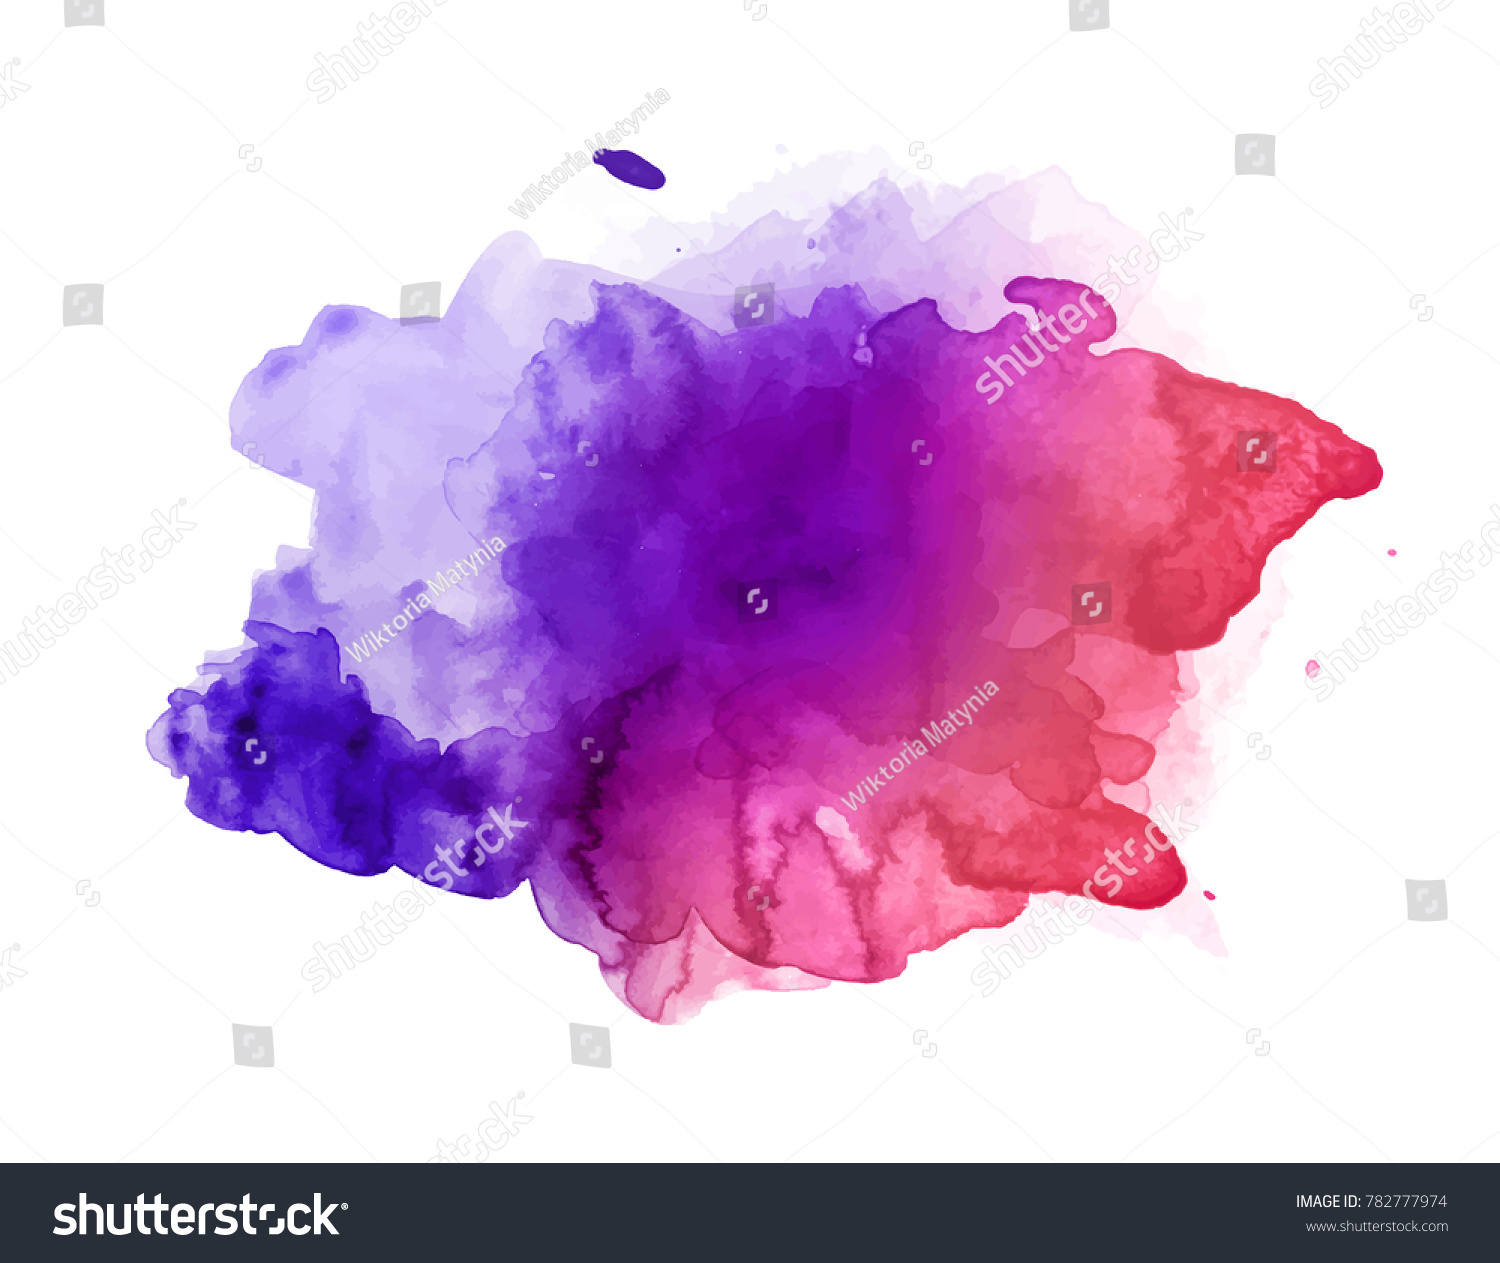 Beautiful Colorful Watercolor Stain Vector Stock Vector (Royalty Free ...